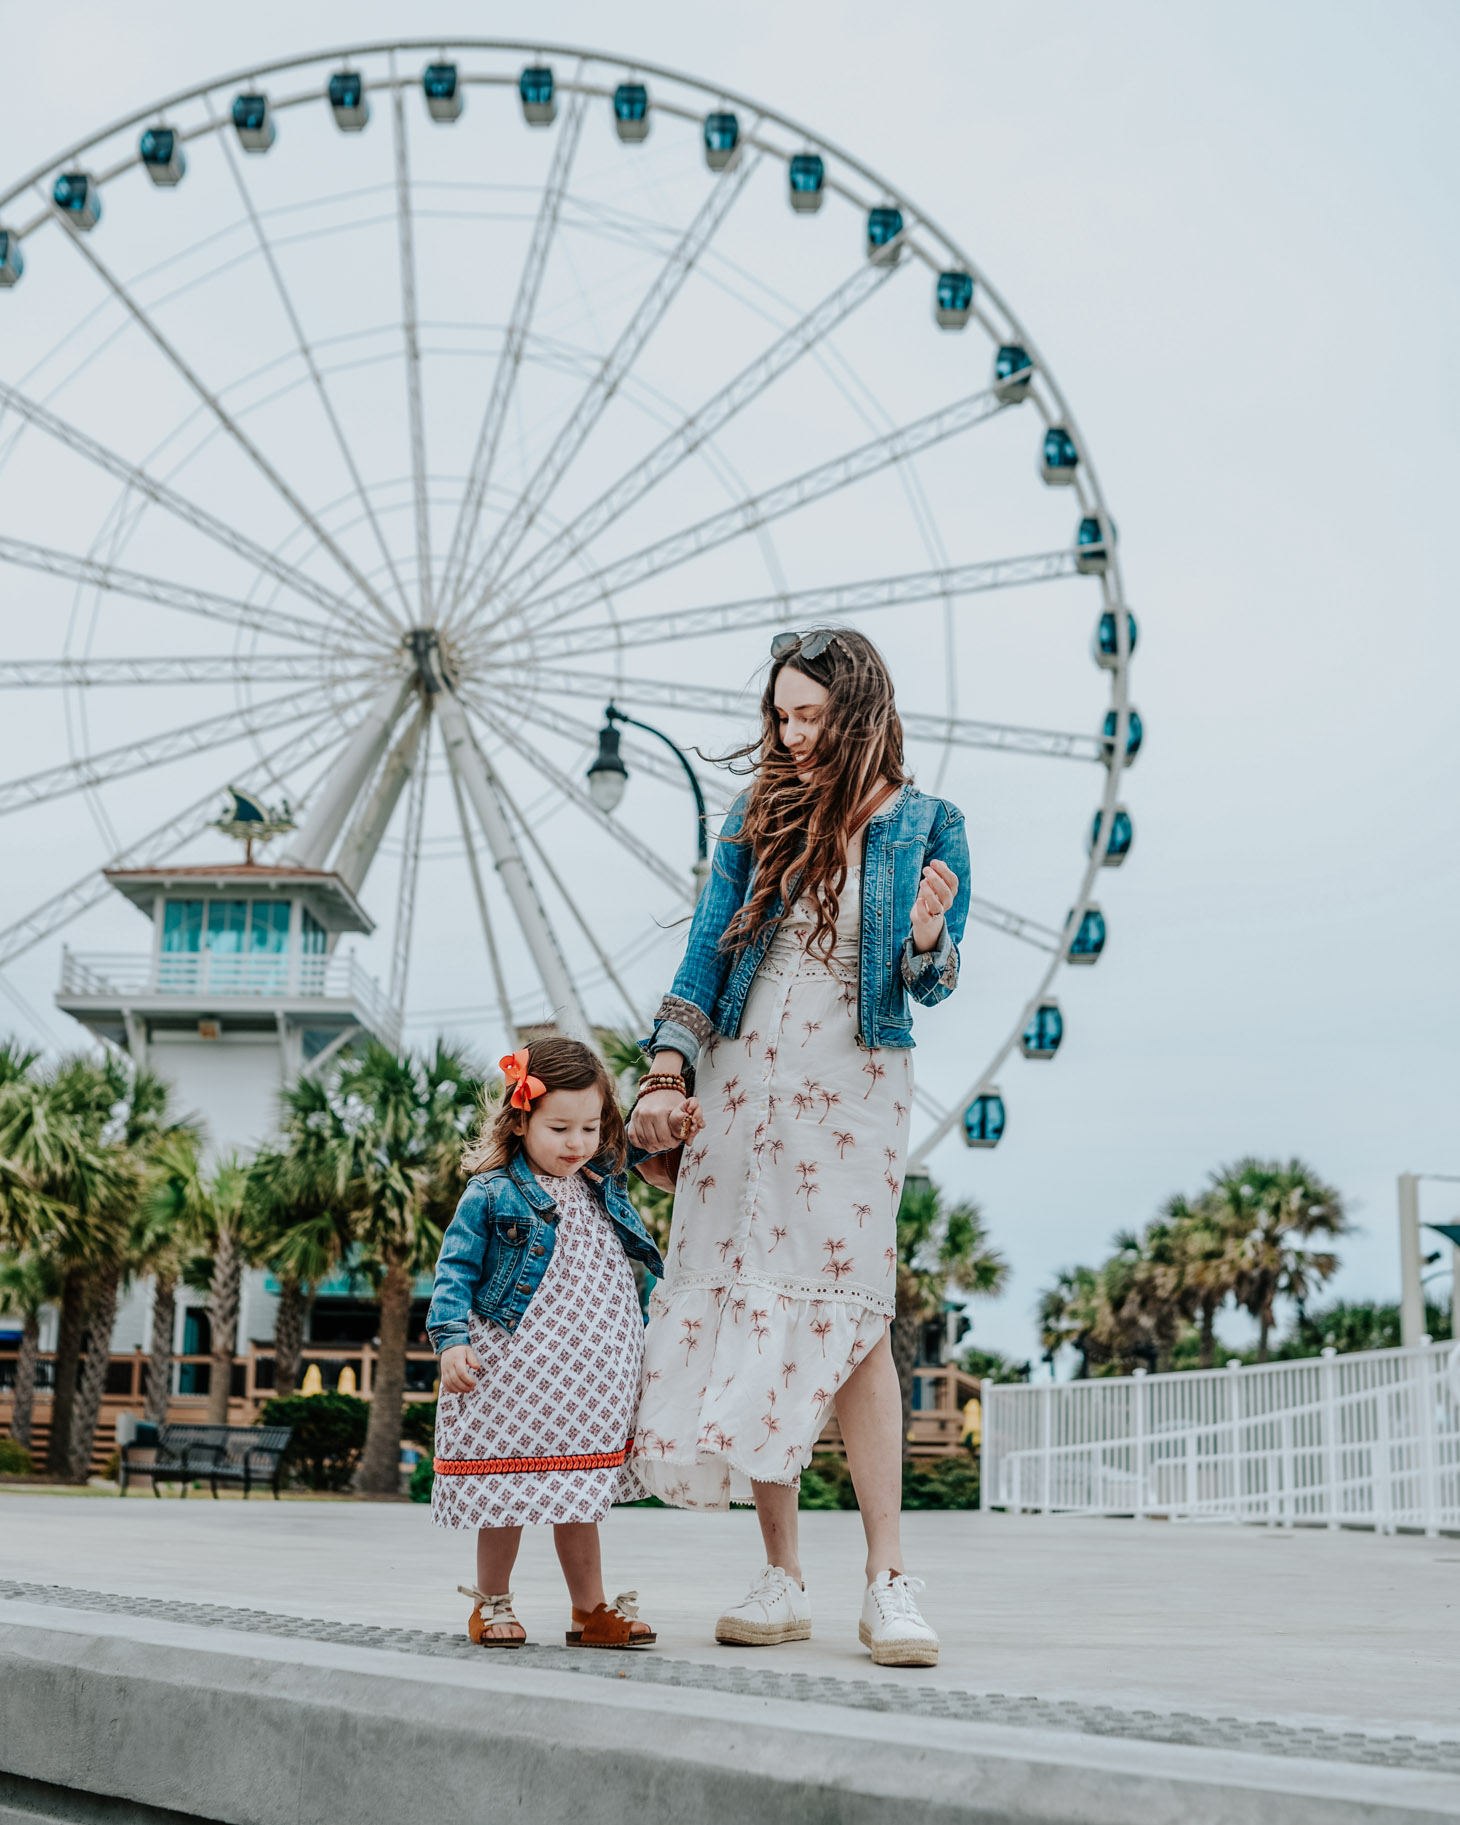 The Ultimate Myrtle Beach Travel Guide, the best things to do in Myrtle Beach SC, featured by top US travel blog, Lone Star Looking Glass